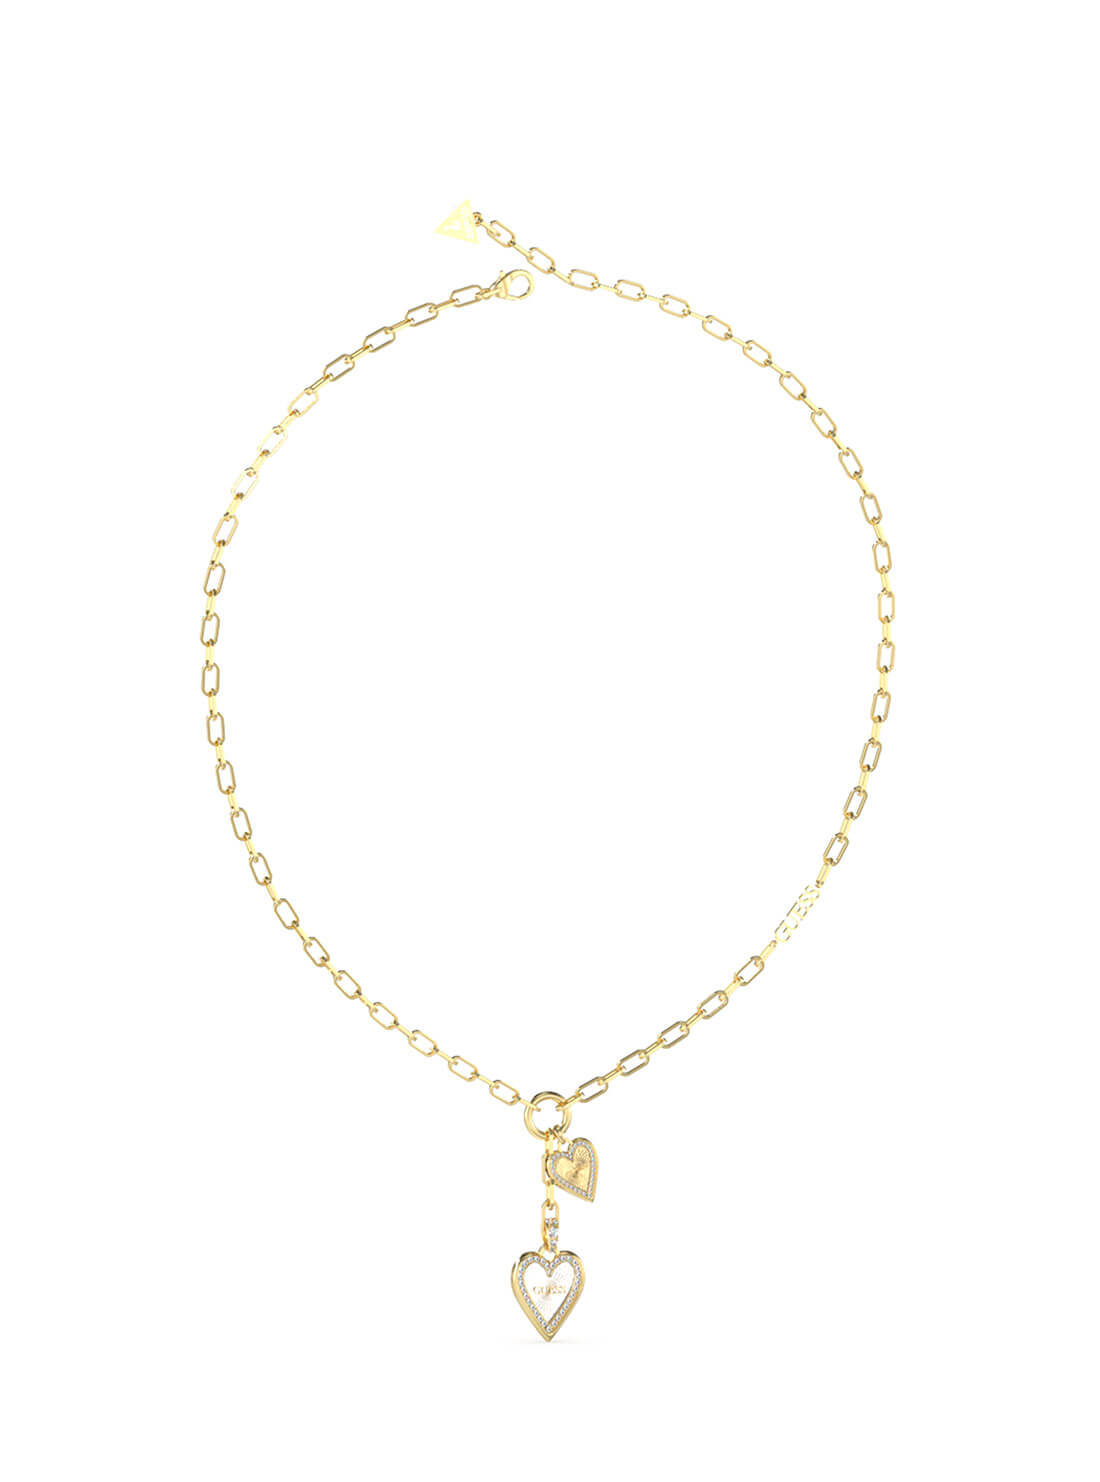 Gold Love Me Tender White Heart Necklace | GUESS Women's Accessories | front view